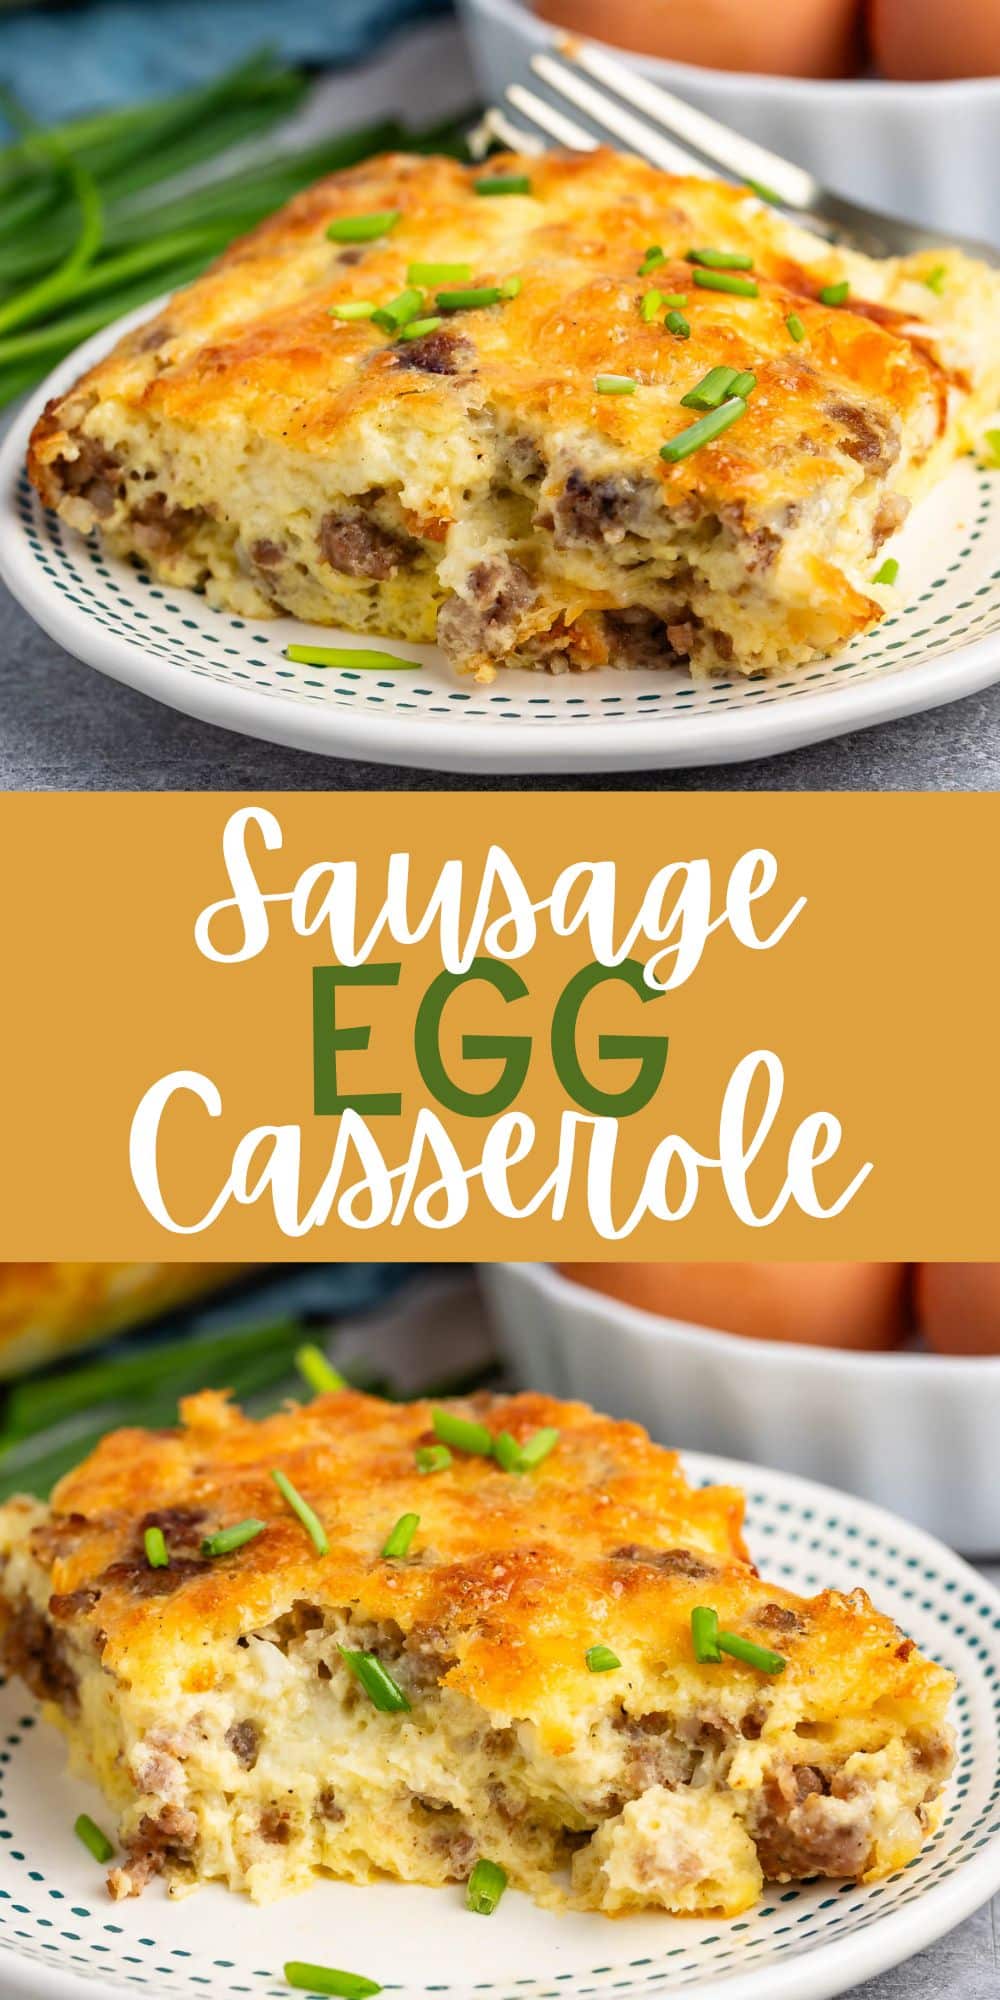 two photos of egg casserole with sausage baked in on a white plate with words on the image.